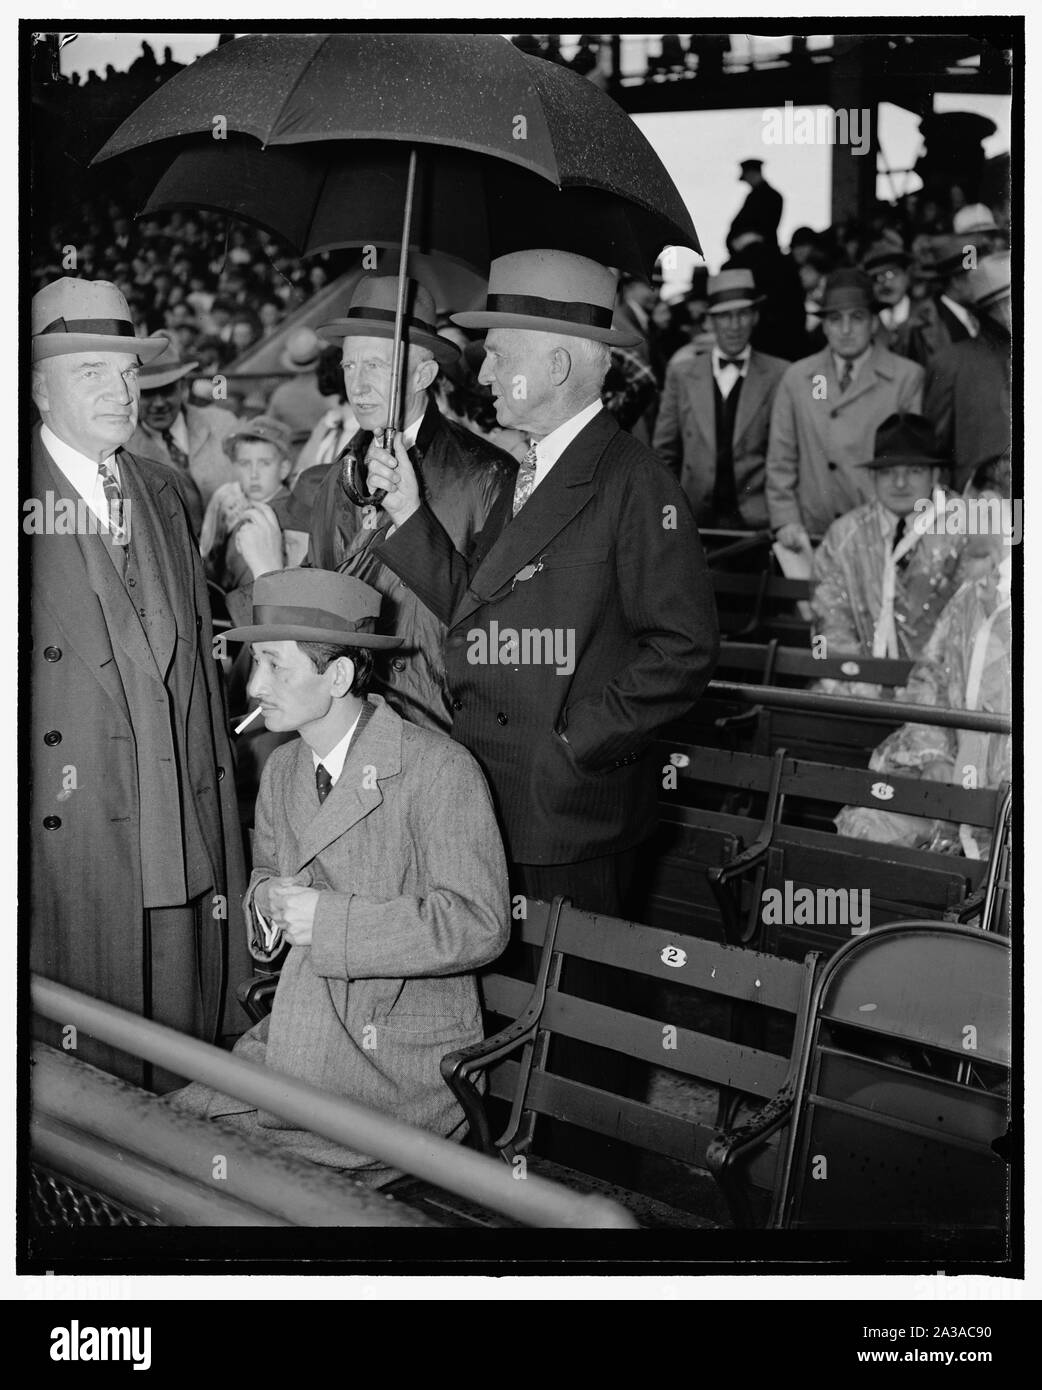 See season's opener. Washington, D.C., April 18. Precedence and politics were off their mind today as the nation's lawmakers, government officials, and diplomats attended today's opening game of the 1938 baseball season between the Washington Senators and the Philadelphia Athletics. Here we see, left to right: J.J. Pelley, President of the Association of American Railroads; Japanese Ambassador Saito, Senator Frederick Hale, of Maine; and William Julian, U.S. Treasurer, 4/18/38 Stock Photo